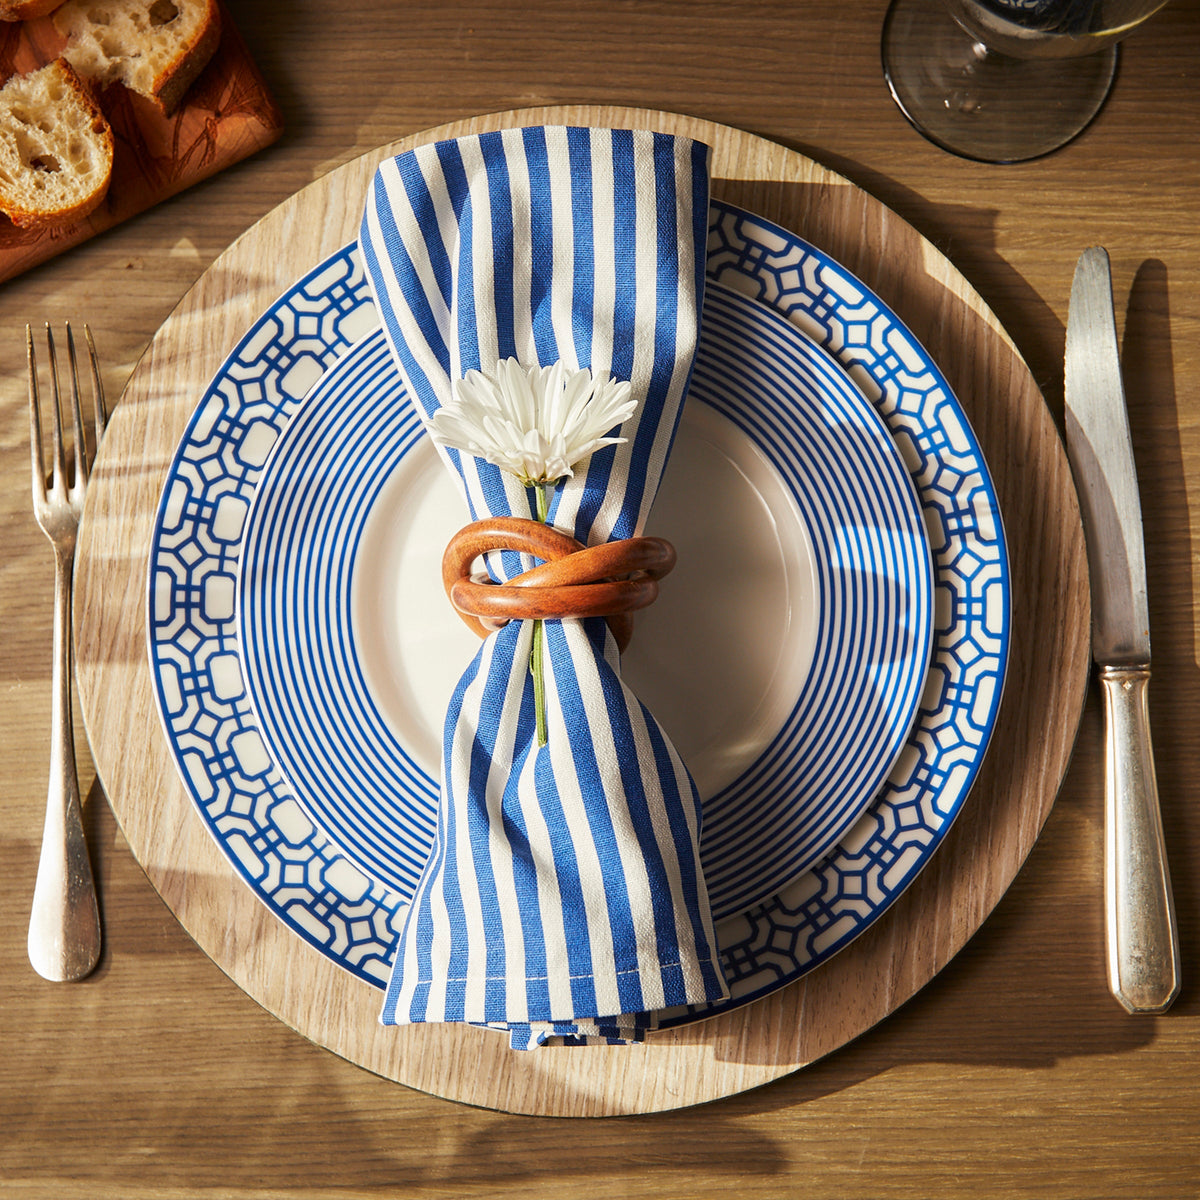 A Caskata Pinstripe Dinner Napkins in Blue Set/4 with a flower on it.